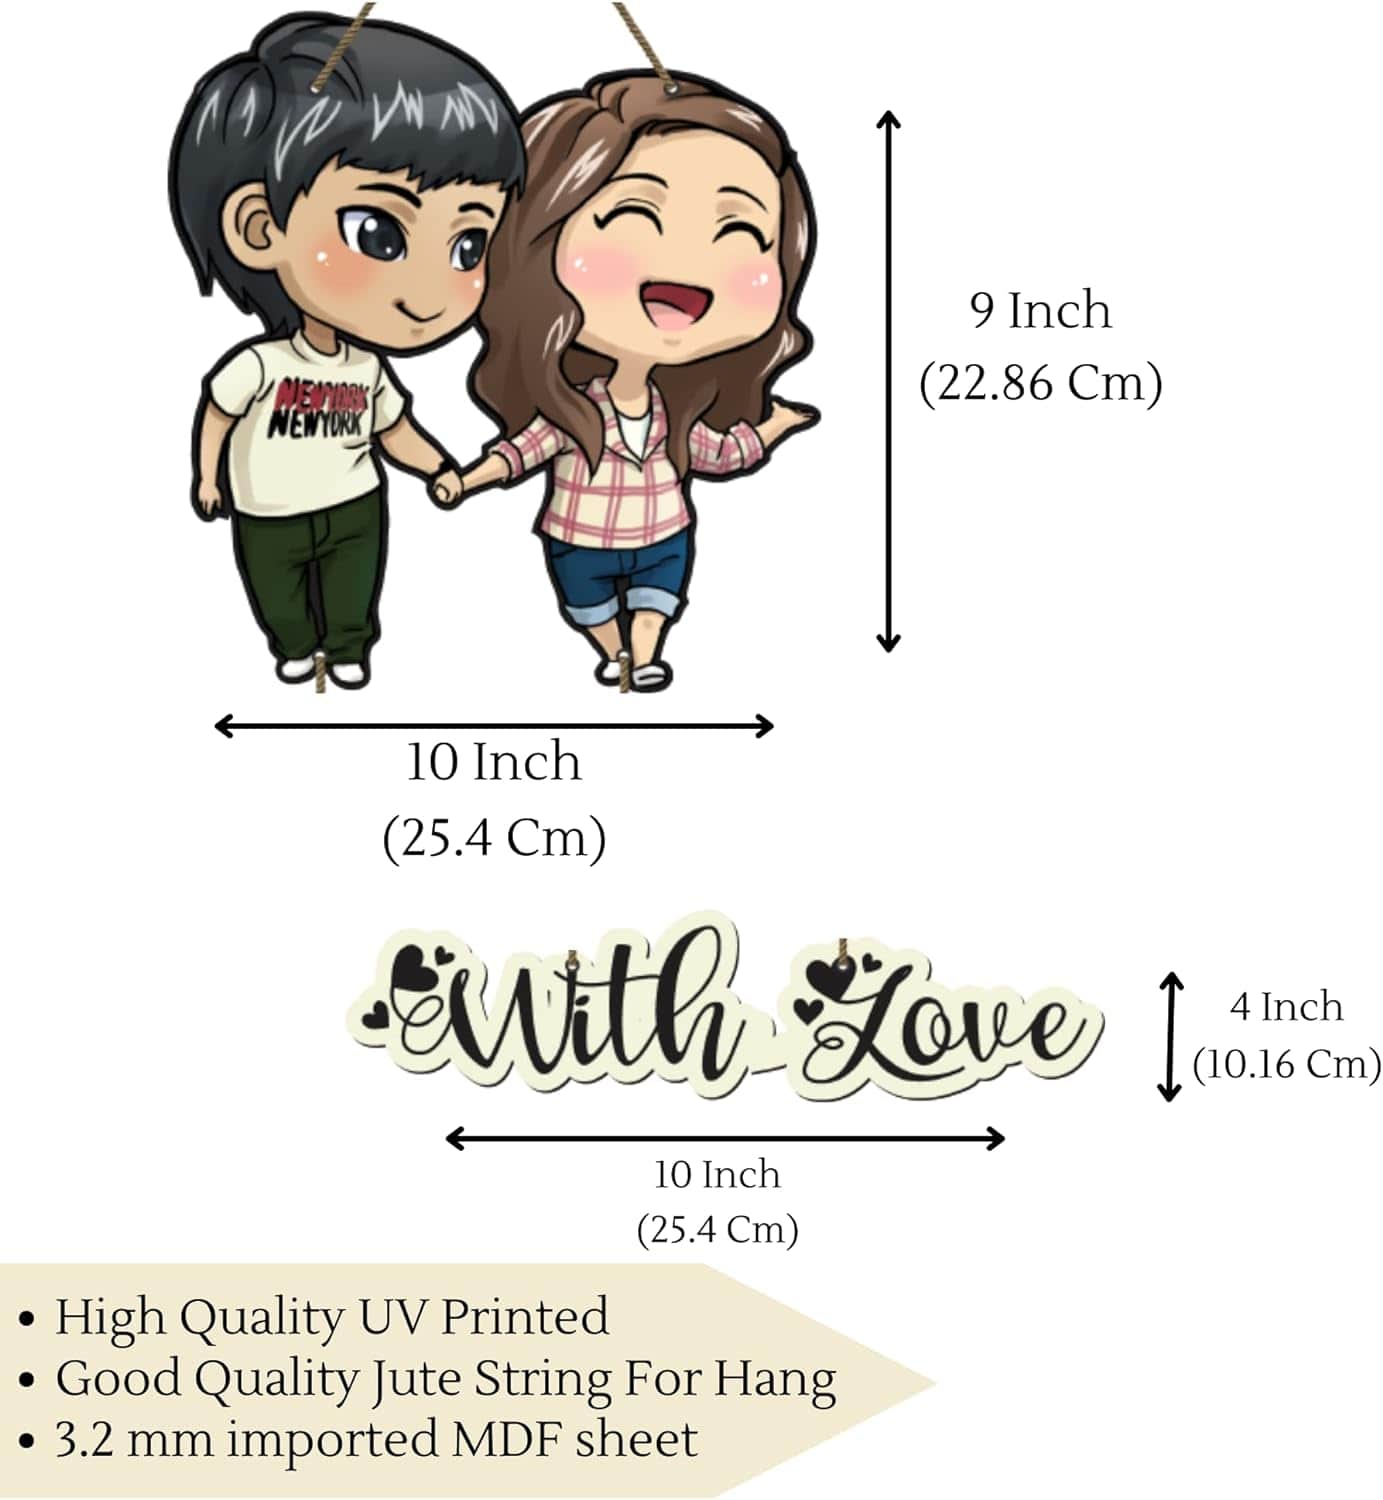 Buy Future Works couple gift set wooden mobile stand with cute message gift  for girlfriend & gift for boyfriend unique gift items for valentine day  (boyfriend & girlfriend set of 2) 22.86